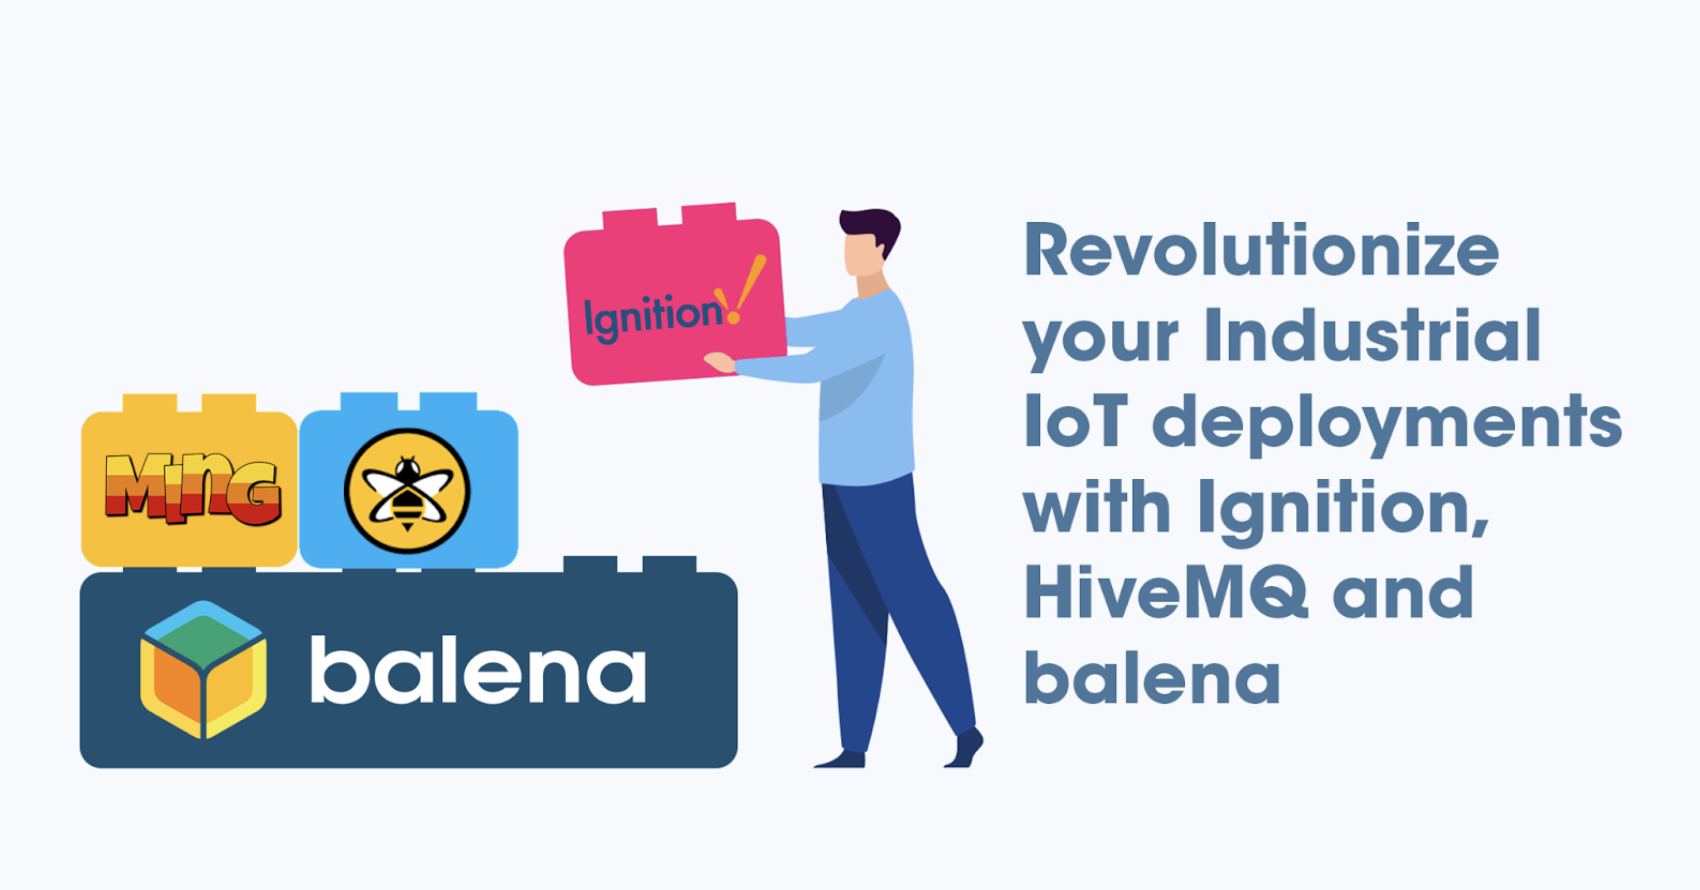 Convert your Industrial deployment into an Industrial Data Architecture Managed with MQTT Sparkplug, Ignition, HiveMQ and balena